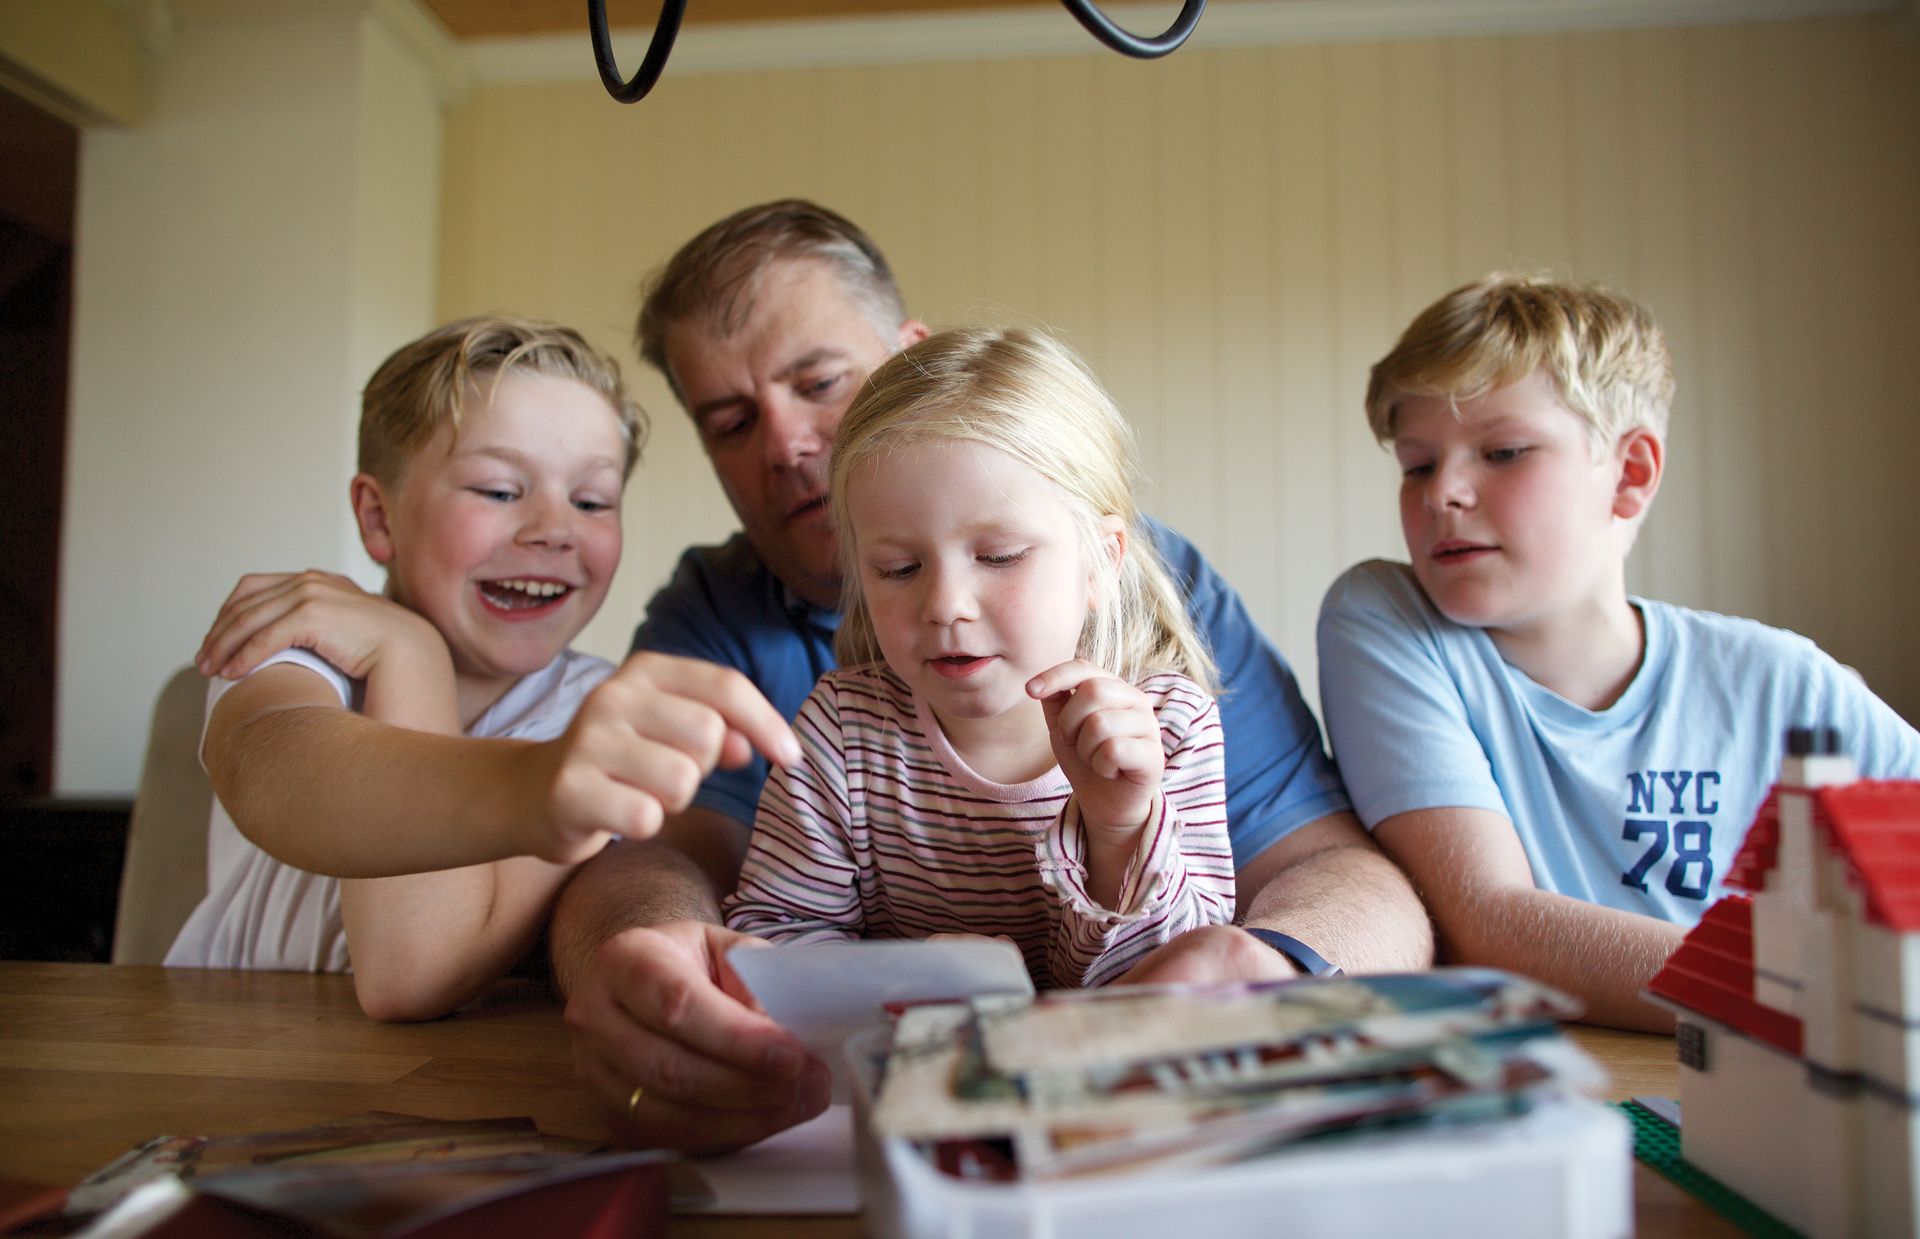 Christian and his children look through family photographs. Christian is grateful for the opportunity he has to connect his children to their ancestors.